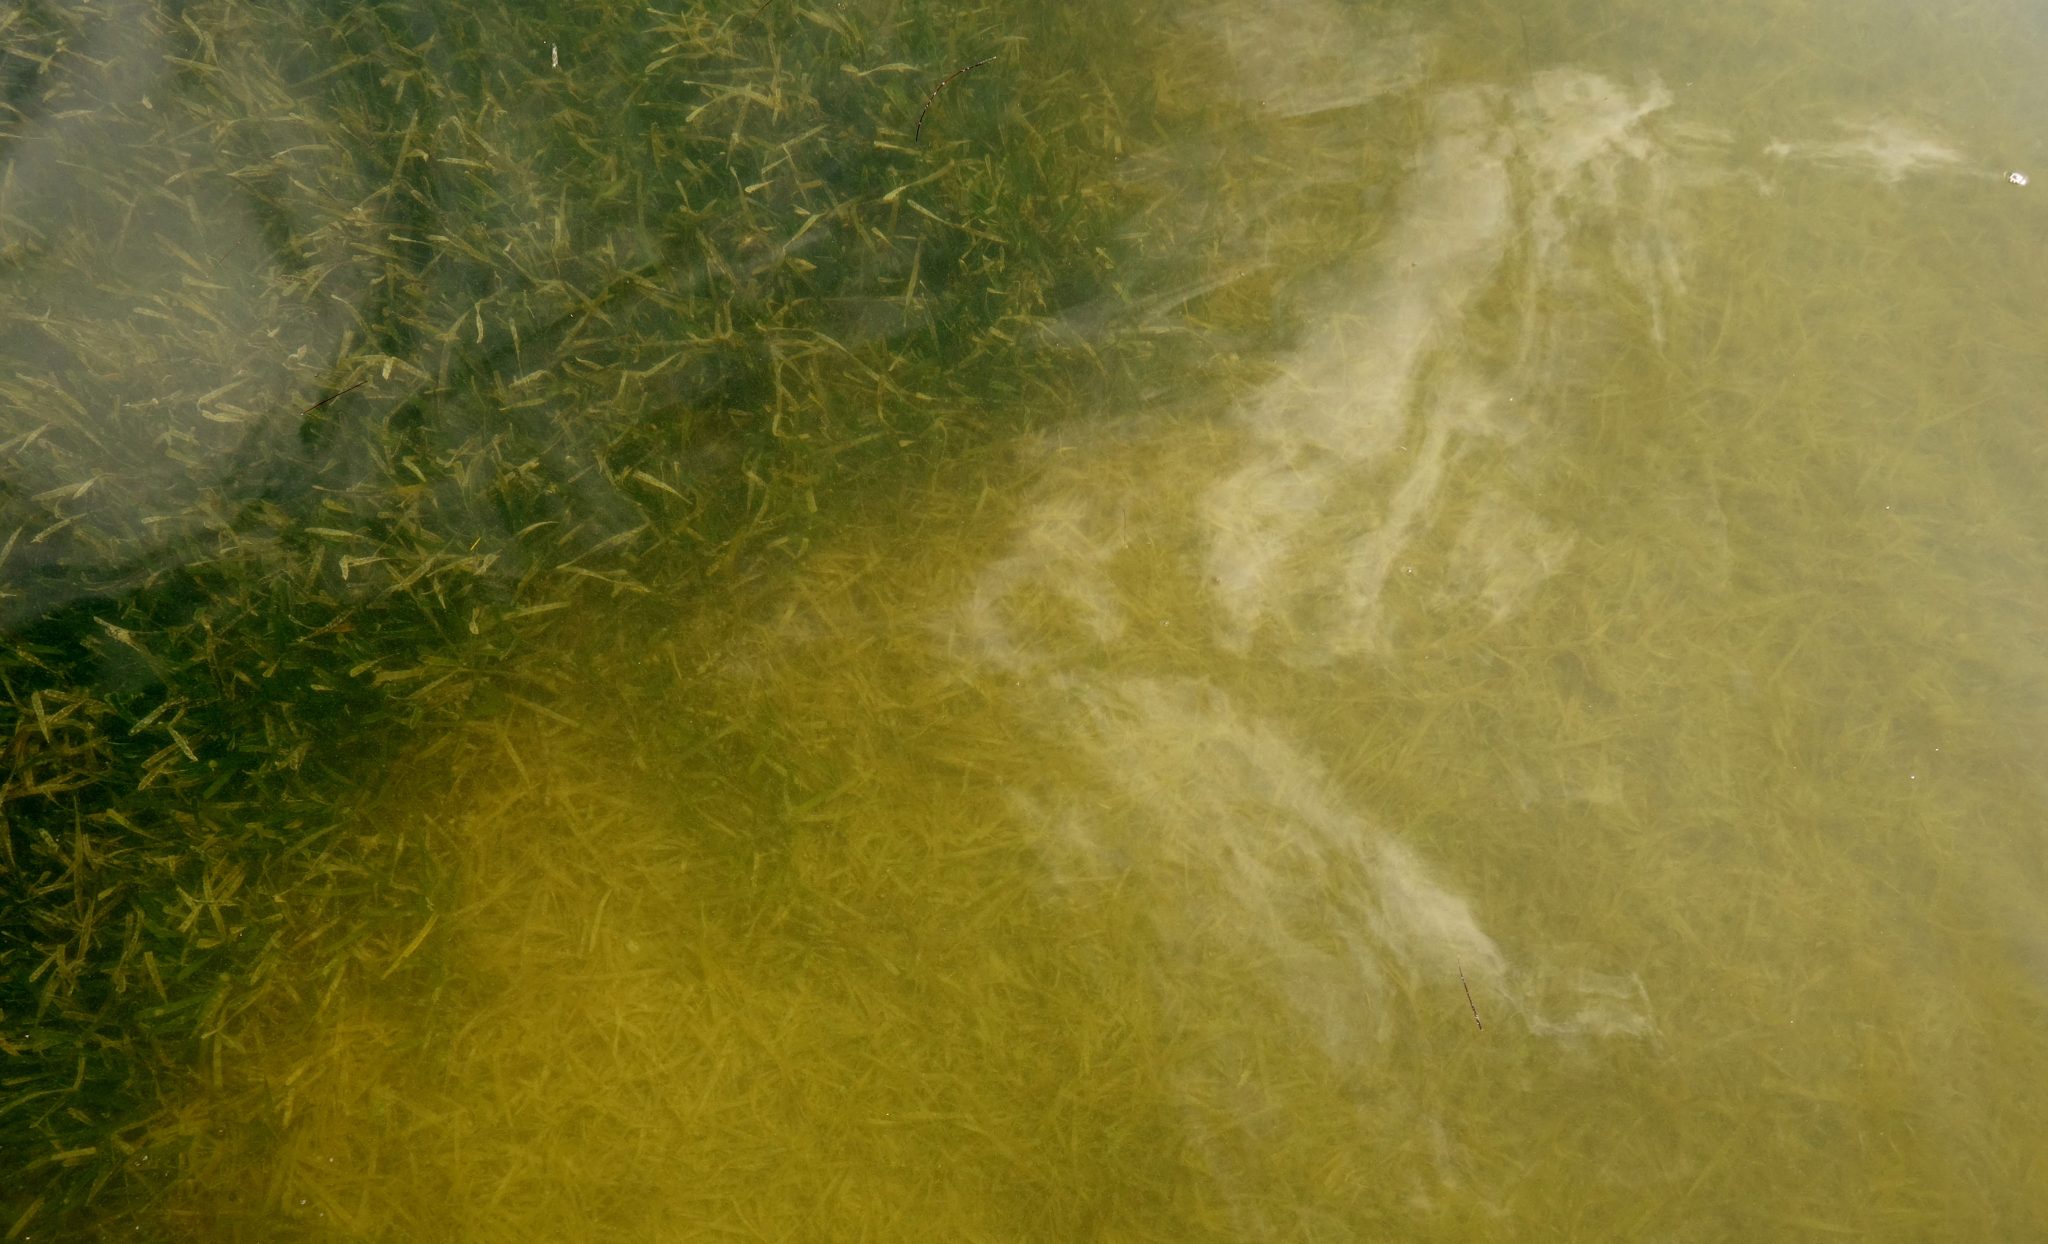 An area of healthy green seagrass is seen April 13, 2016 next to a patch that is yellow and dying in Florida Bay, off the tip of south Florida between the Atlantic Ocean and the Gulf of Mexico. Ecologists say the lack of freshwater, siphoned off to protect sugar cane farms, has led to increasingly salty water that threatens the livelihoods of fishermen.                      Ecologists say the lack of freshwater, siphoned off to protect sugar cane farms, has led to increasingly salty water that threatens the livelihoods of fishermen. Decades ago, the sight of seagrass swaying beneath the waters off south Florida conjured romance for those who dangled their fishing lines in hopes of catching redfish, snook or mangrove snapper."My father used to talk about the grass looking like a woman's long hair flowing in the water. It was just a beautiful sight," said fishing guide Steve Friedman. But now, seagrass is dying at a rate unseen since the late 1980s in the Florida Bay, off the southern tip of Florida between the Atlantic Ocean and the Gulf of Mexico.  / AFP PHOTO / Kerry SHERIDAN / TO GO WITH AFP STORY BY KERRY SHERIDAN- "Underwater 'zombie grass' threatens Florida fishermen'